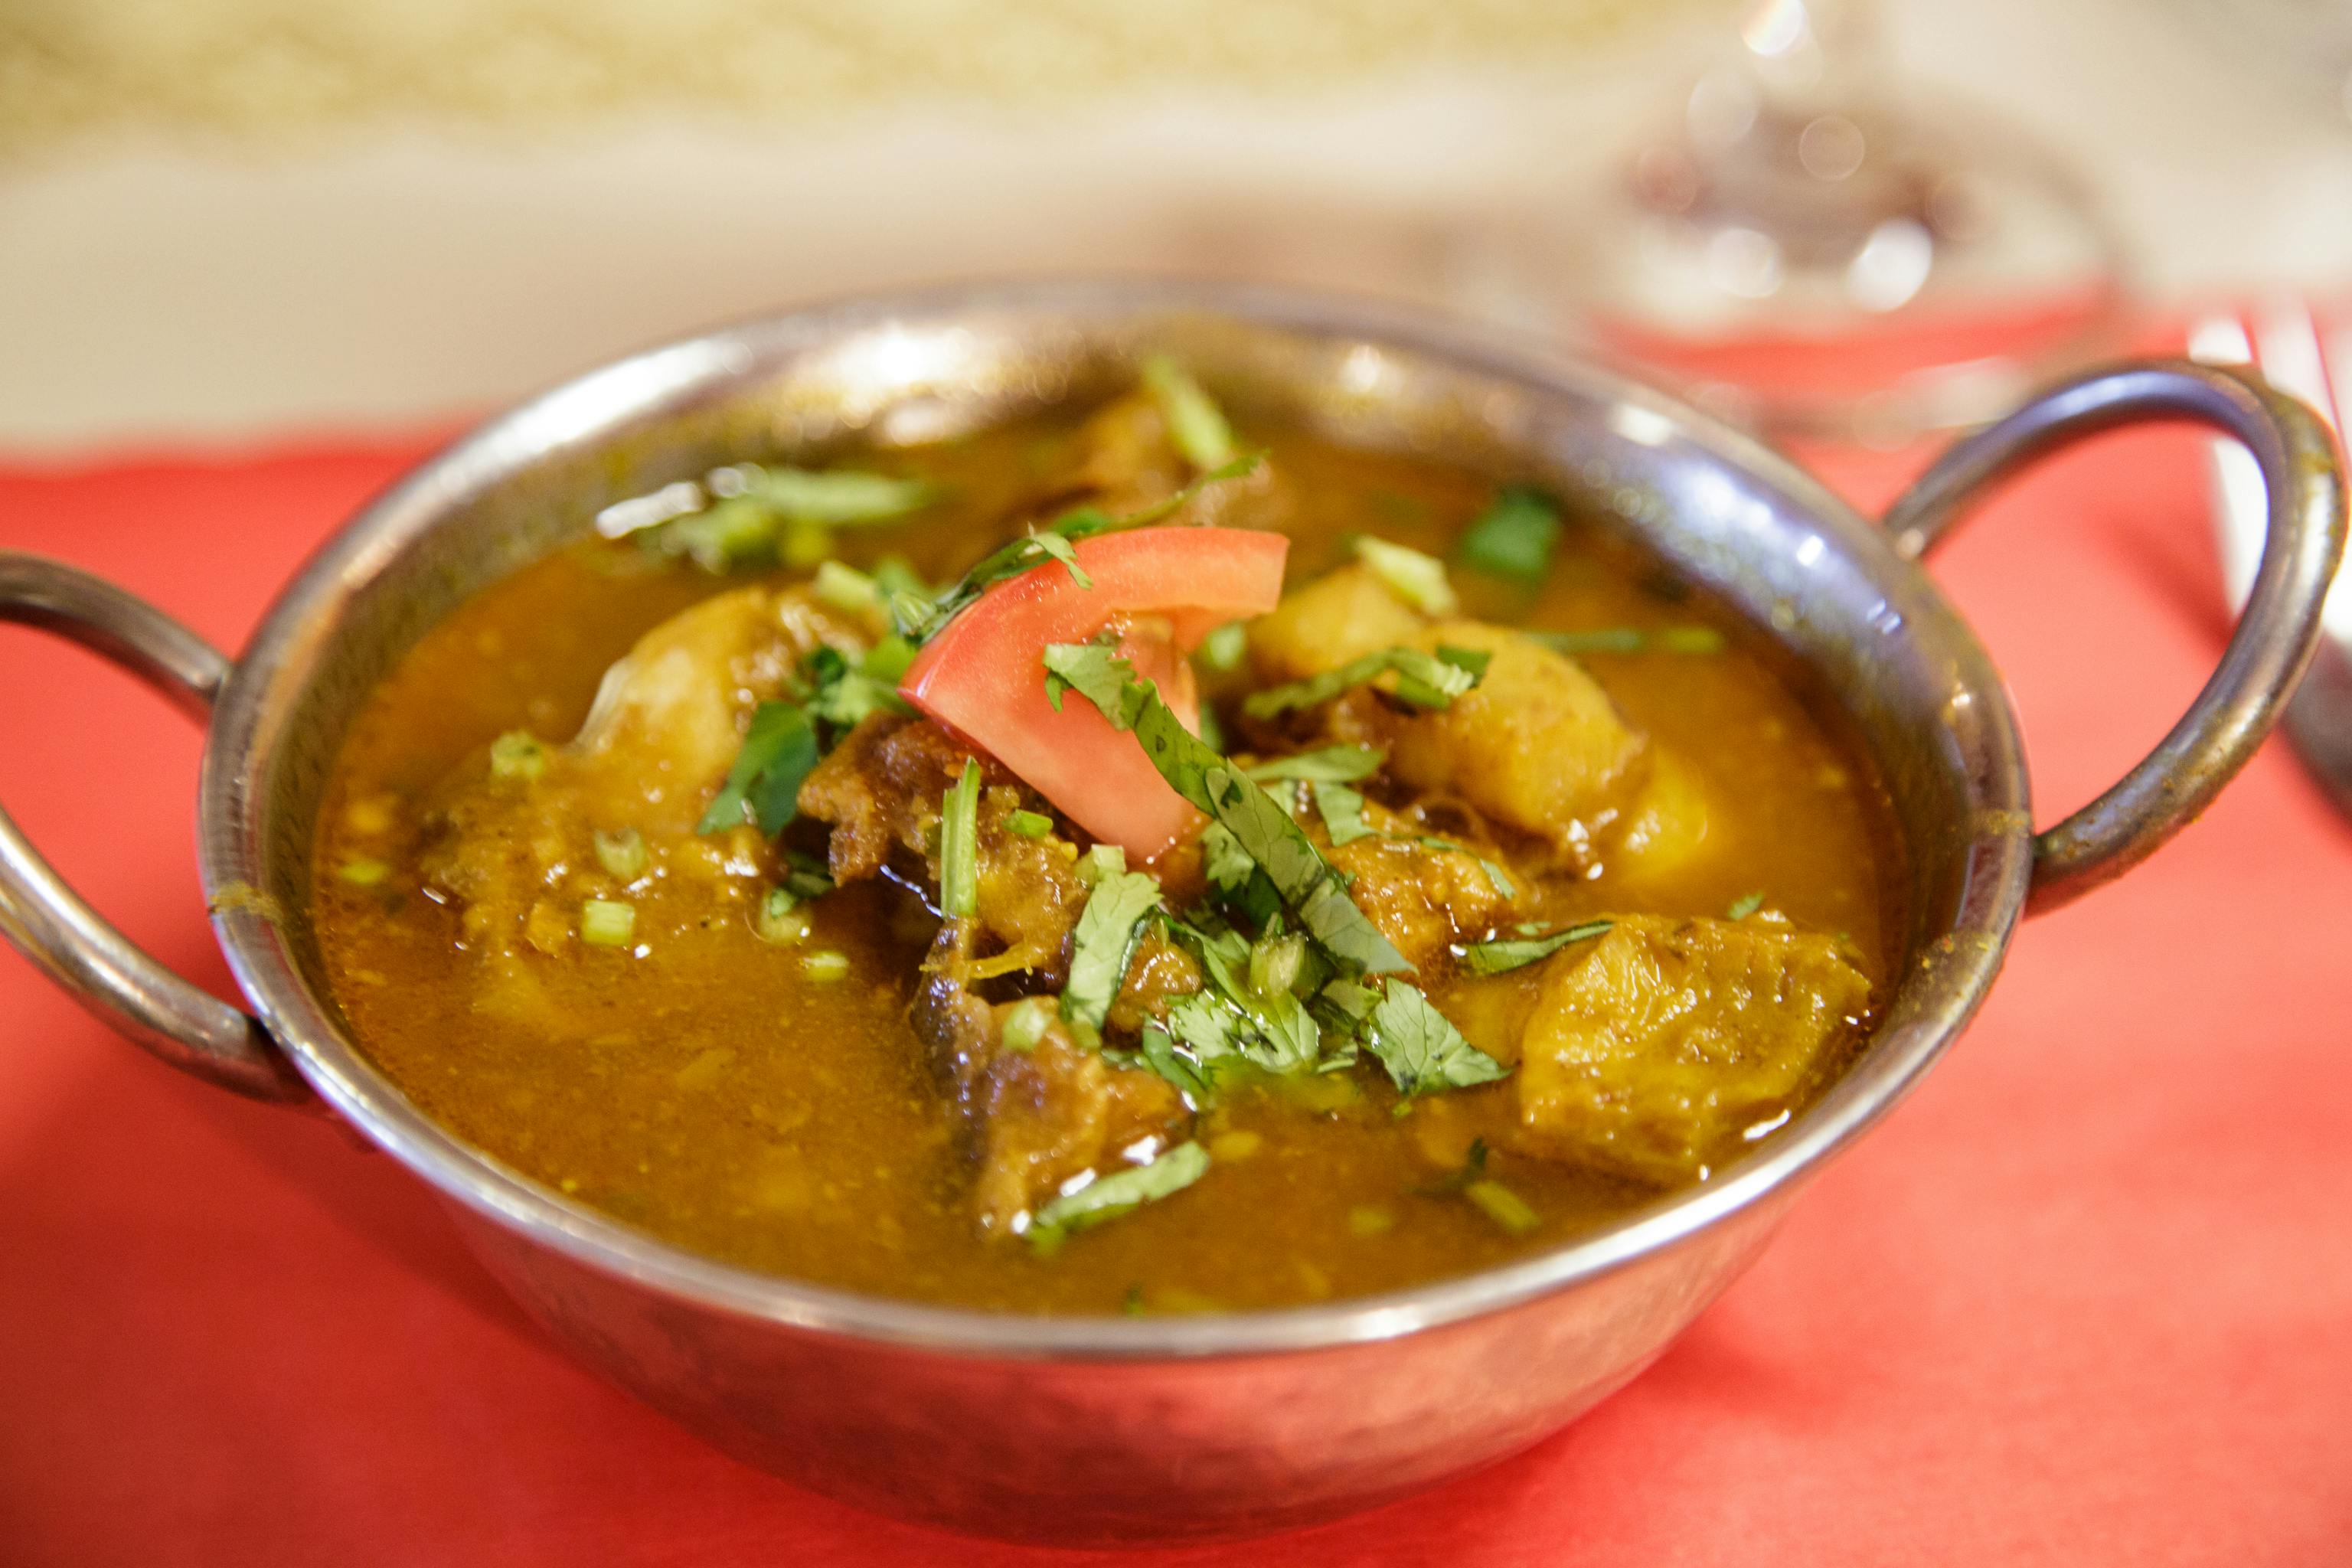 14. Goat Curry from Maharana Restaurant in Madison, WI